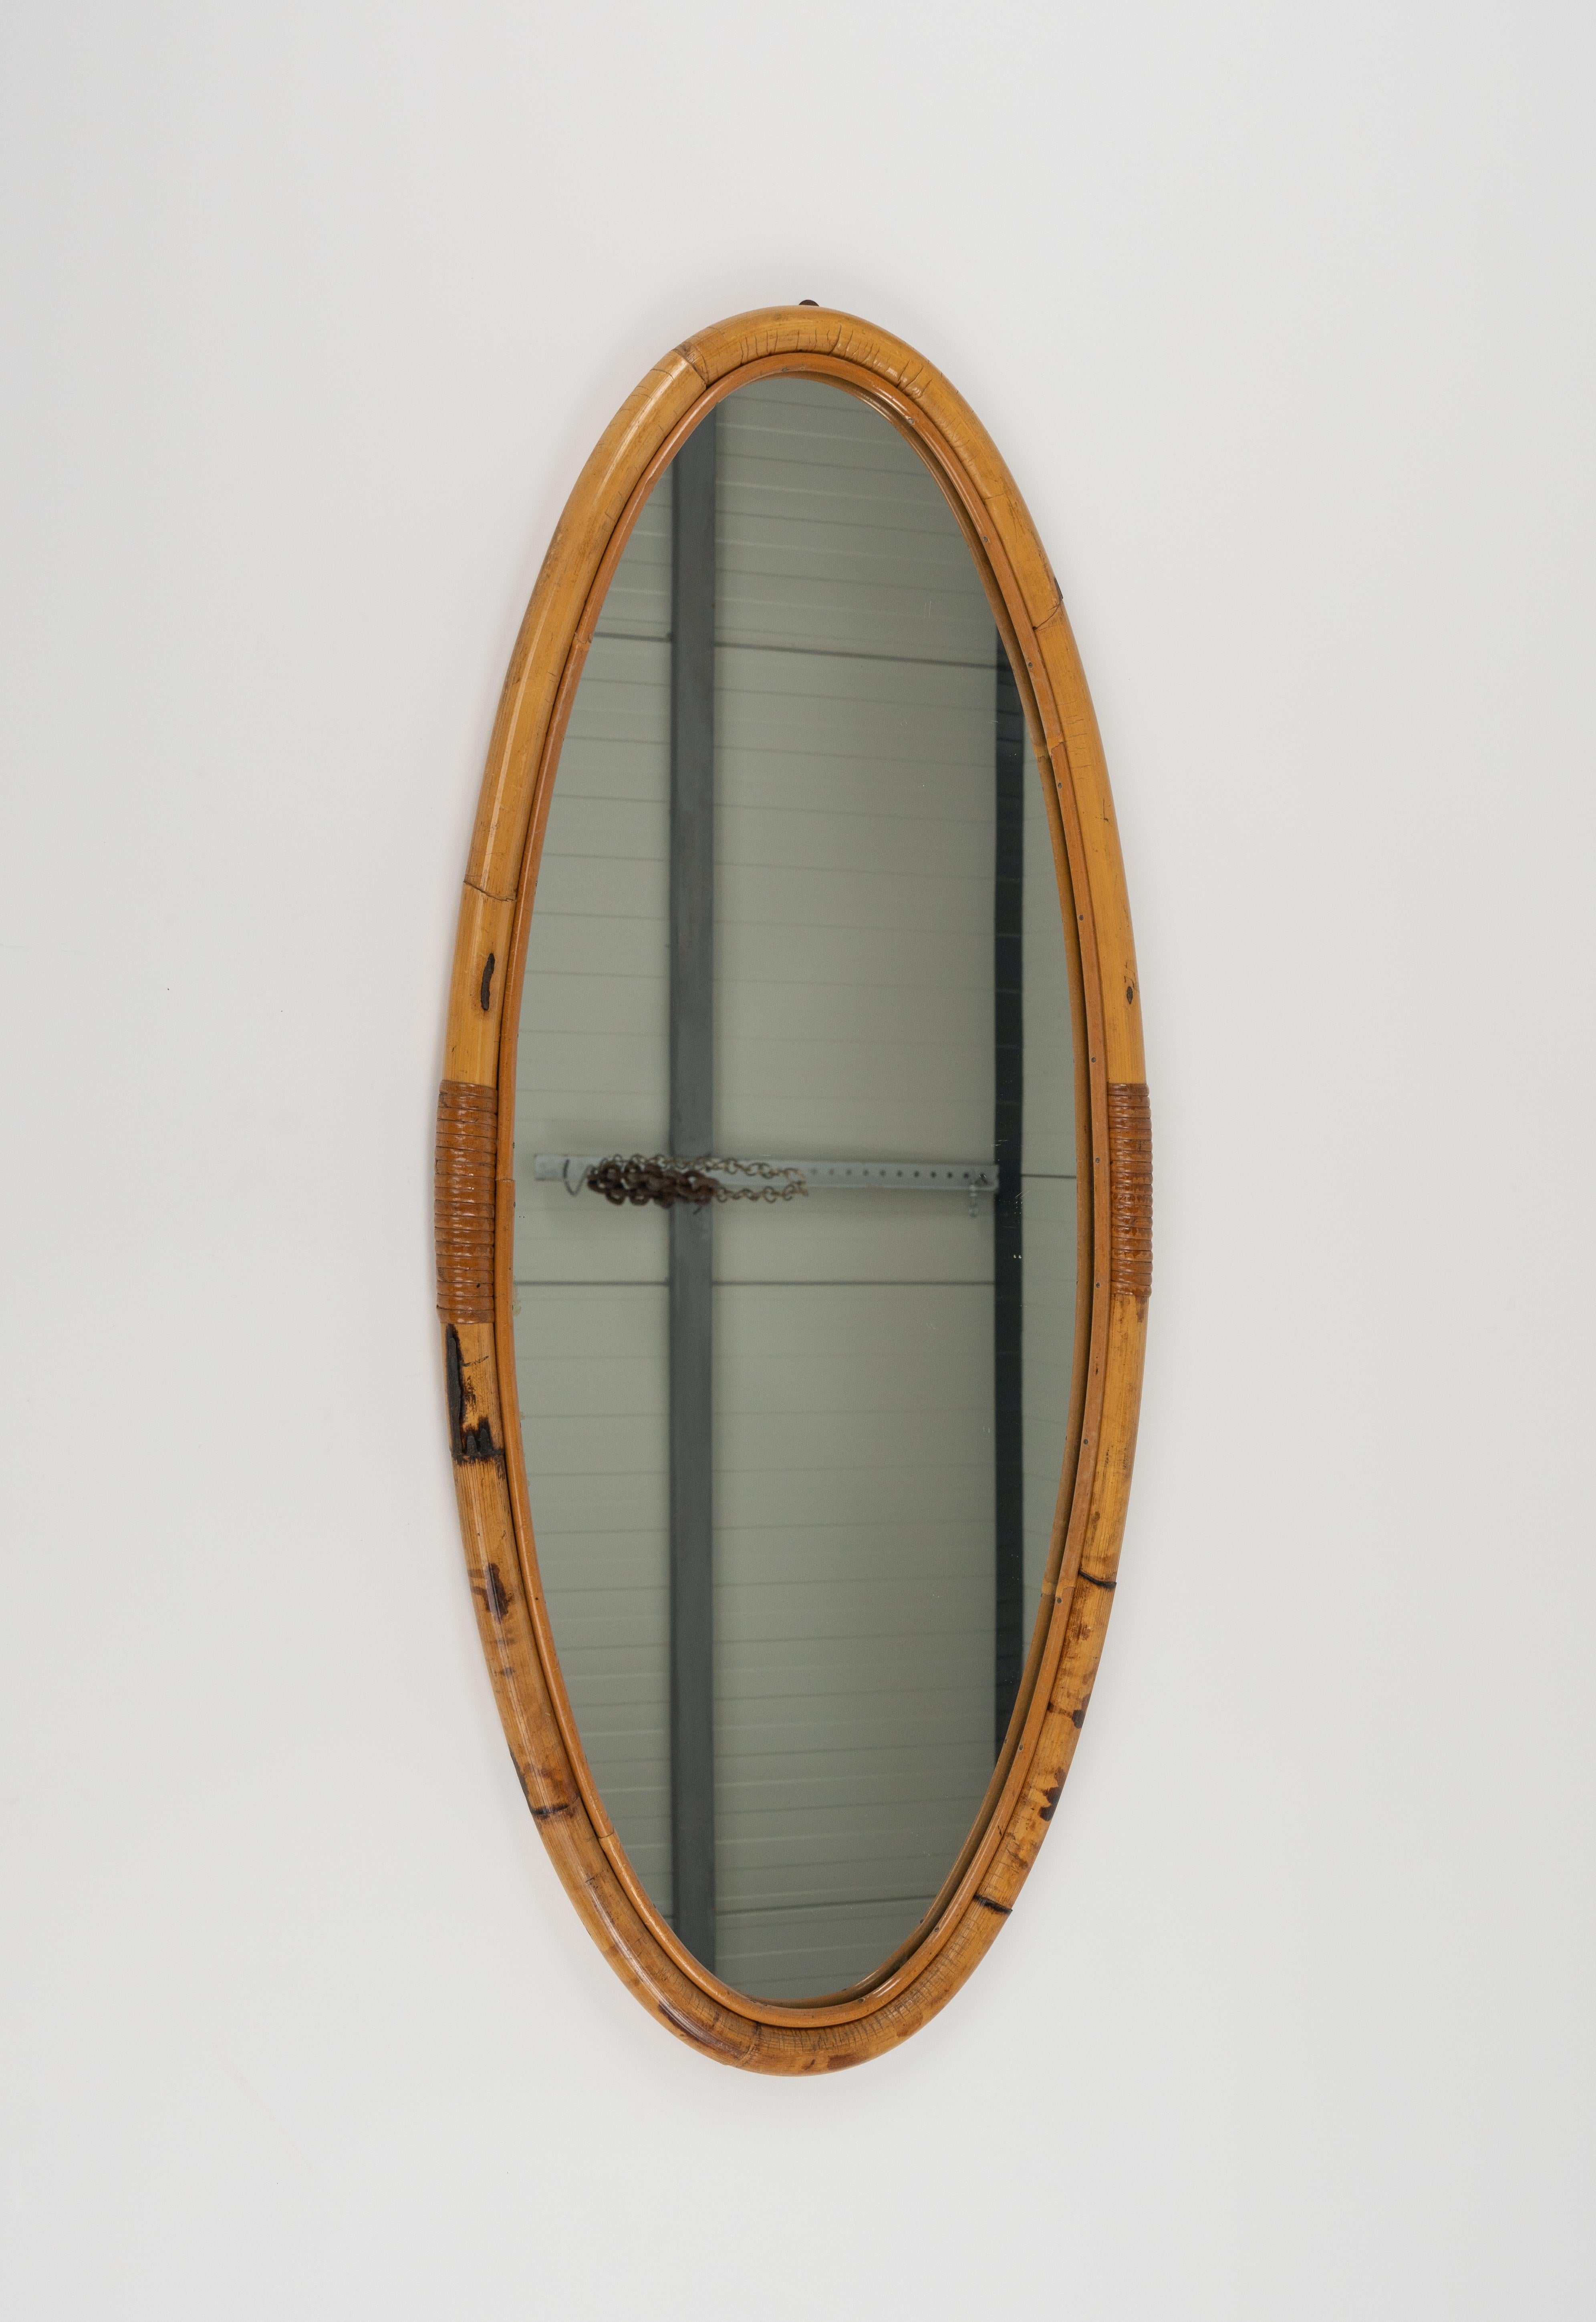 Midcentury Bamboo and Rattan Oval Wall Mirror, Italy 1970s For Sale 8